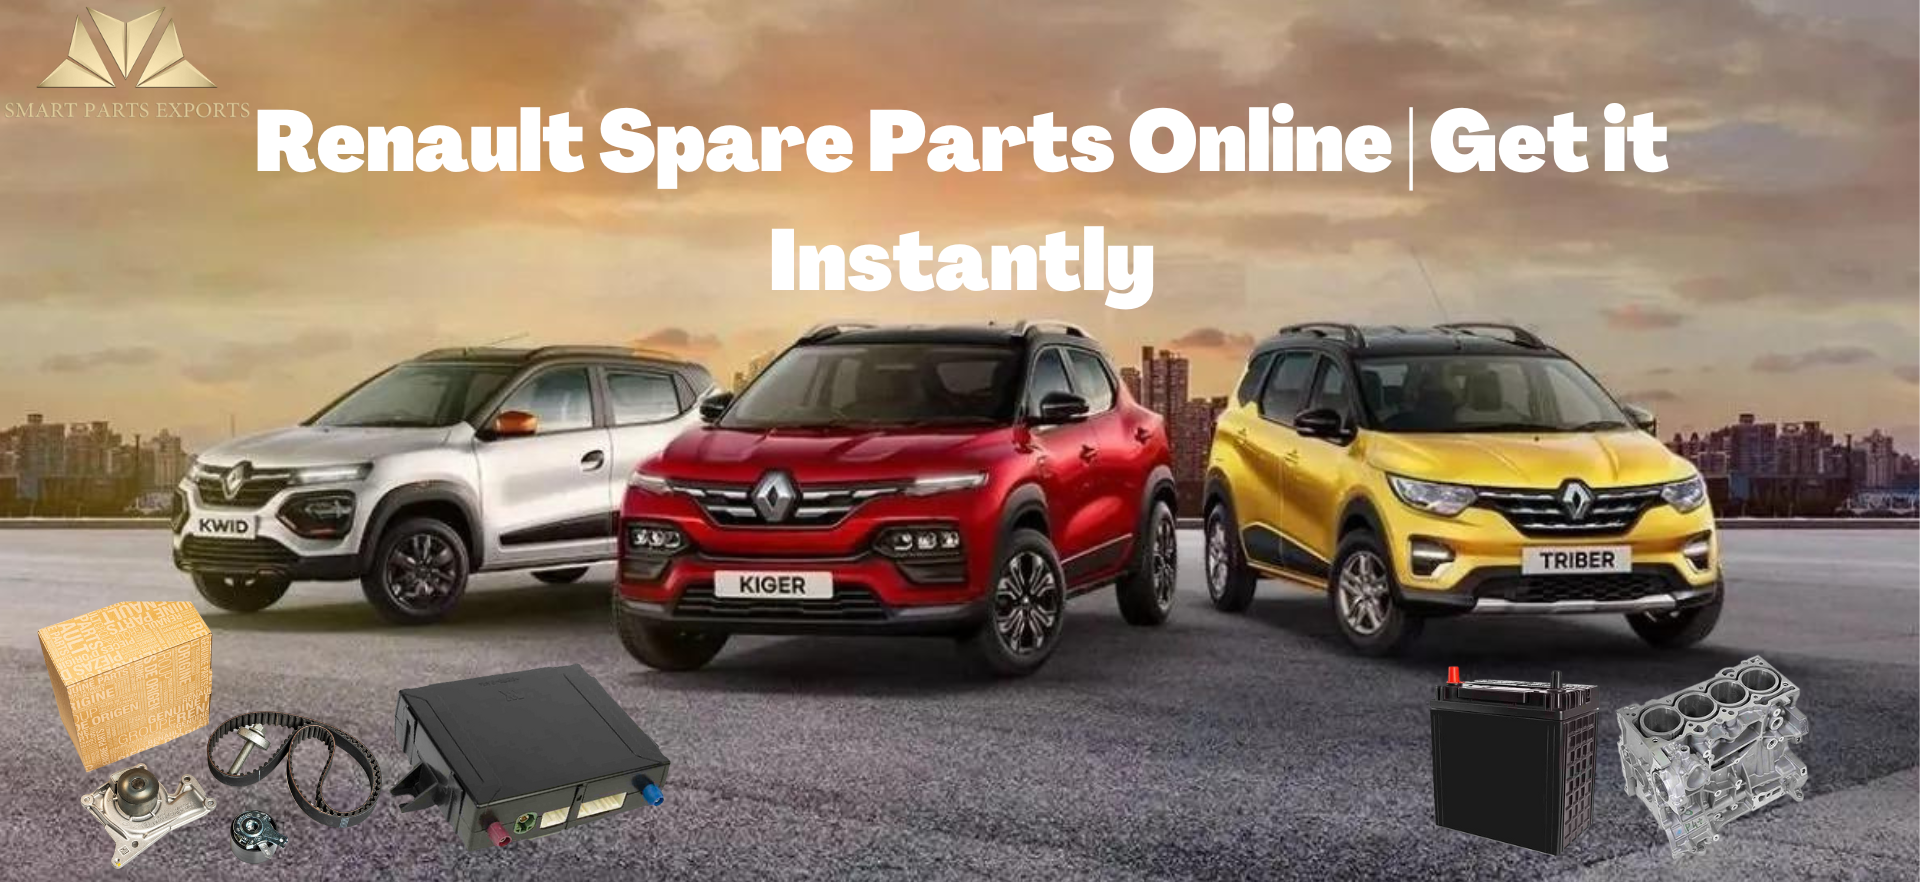 Renault Spare Parts Online | Get it Instantly